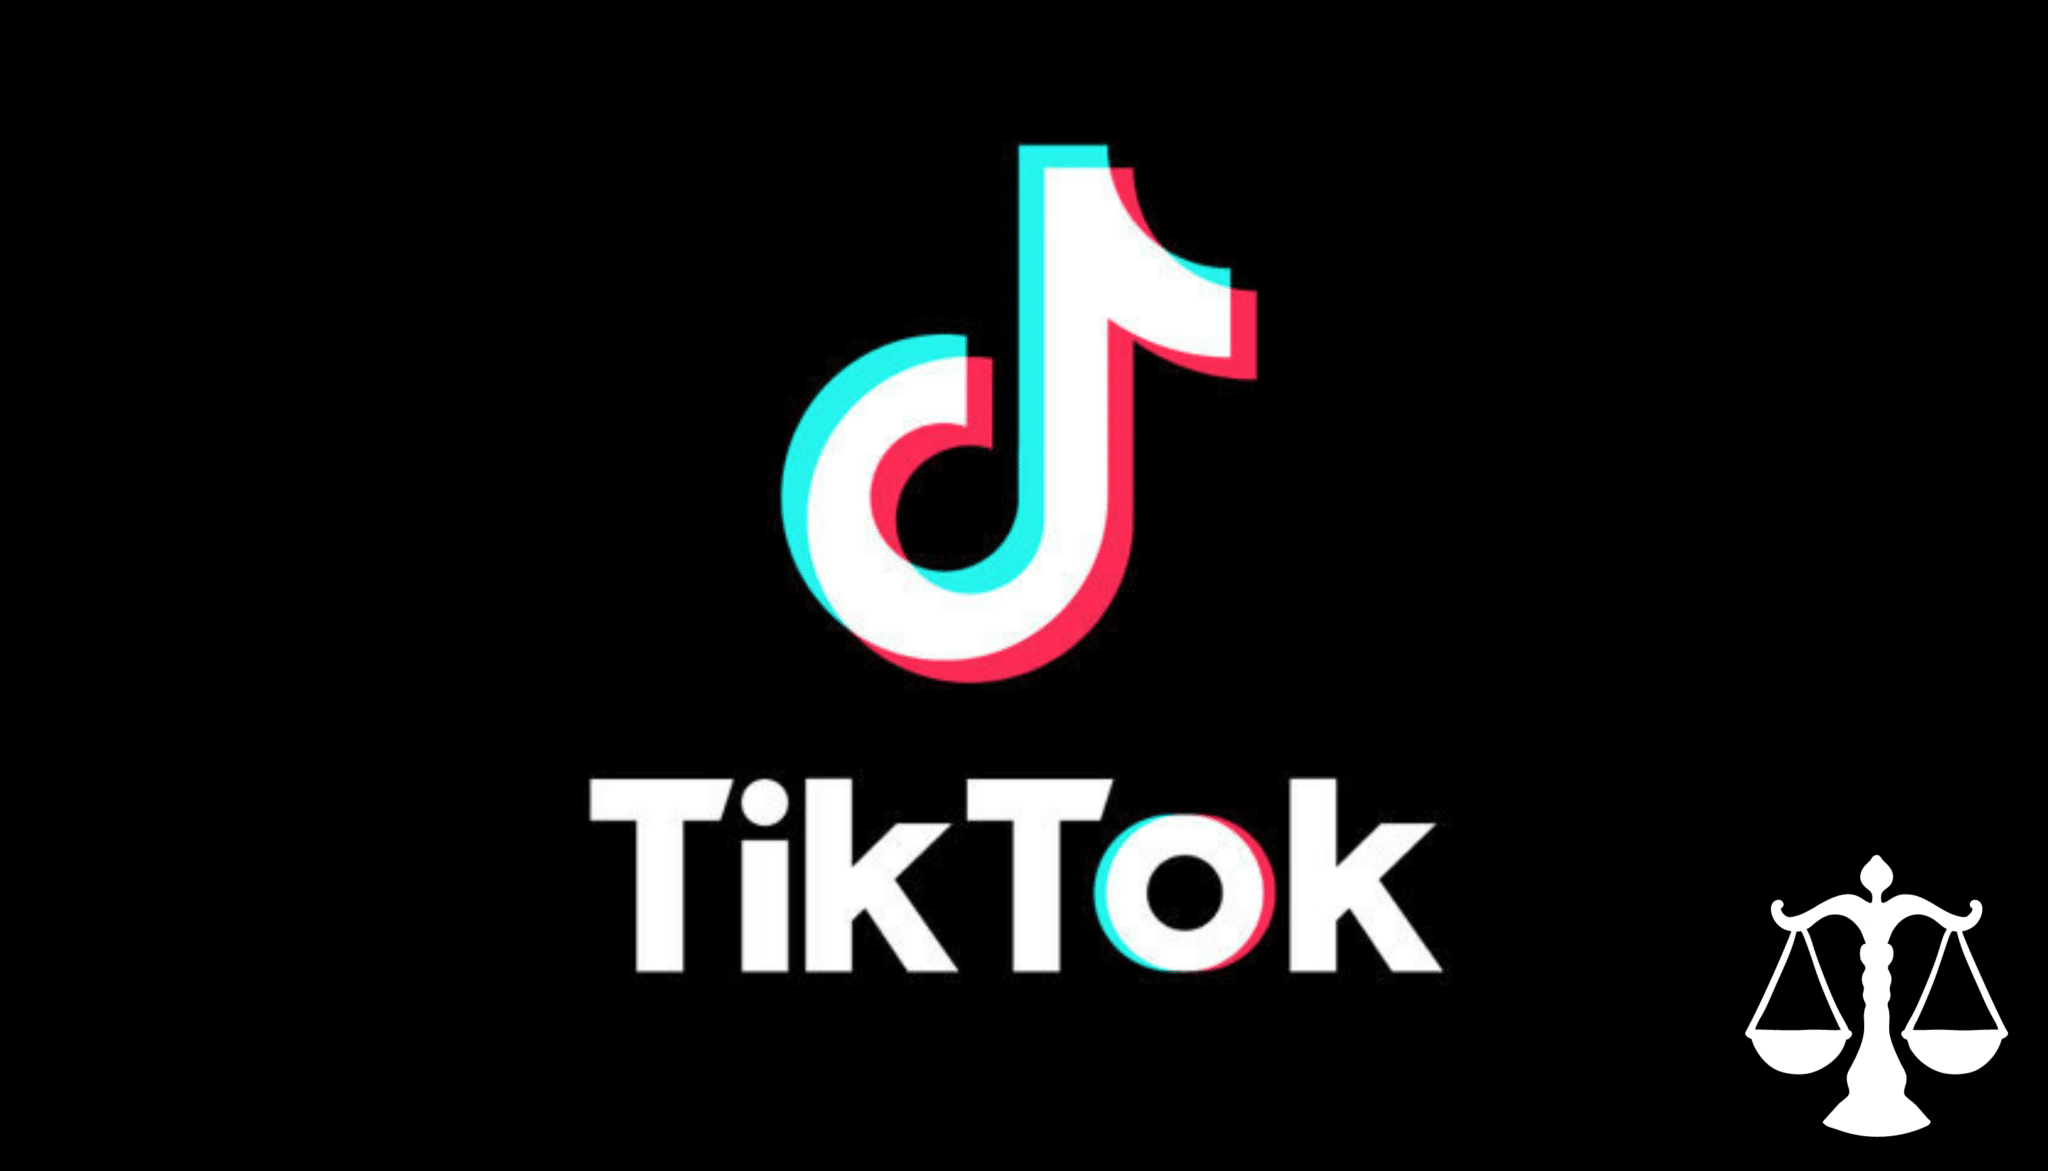 #TikTok highlights its value to brands and search experience